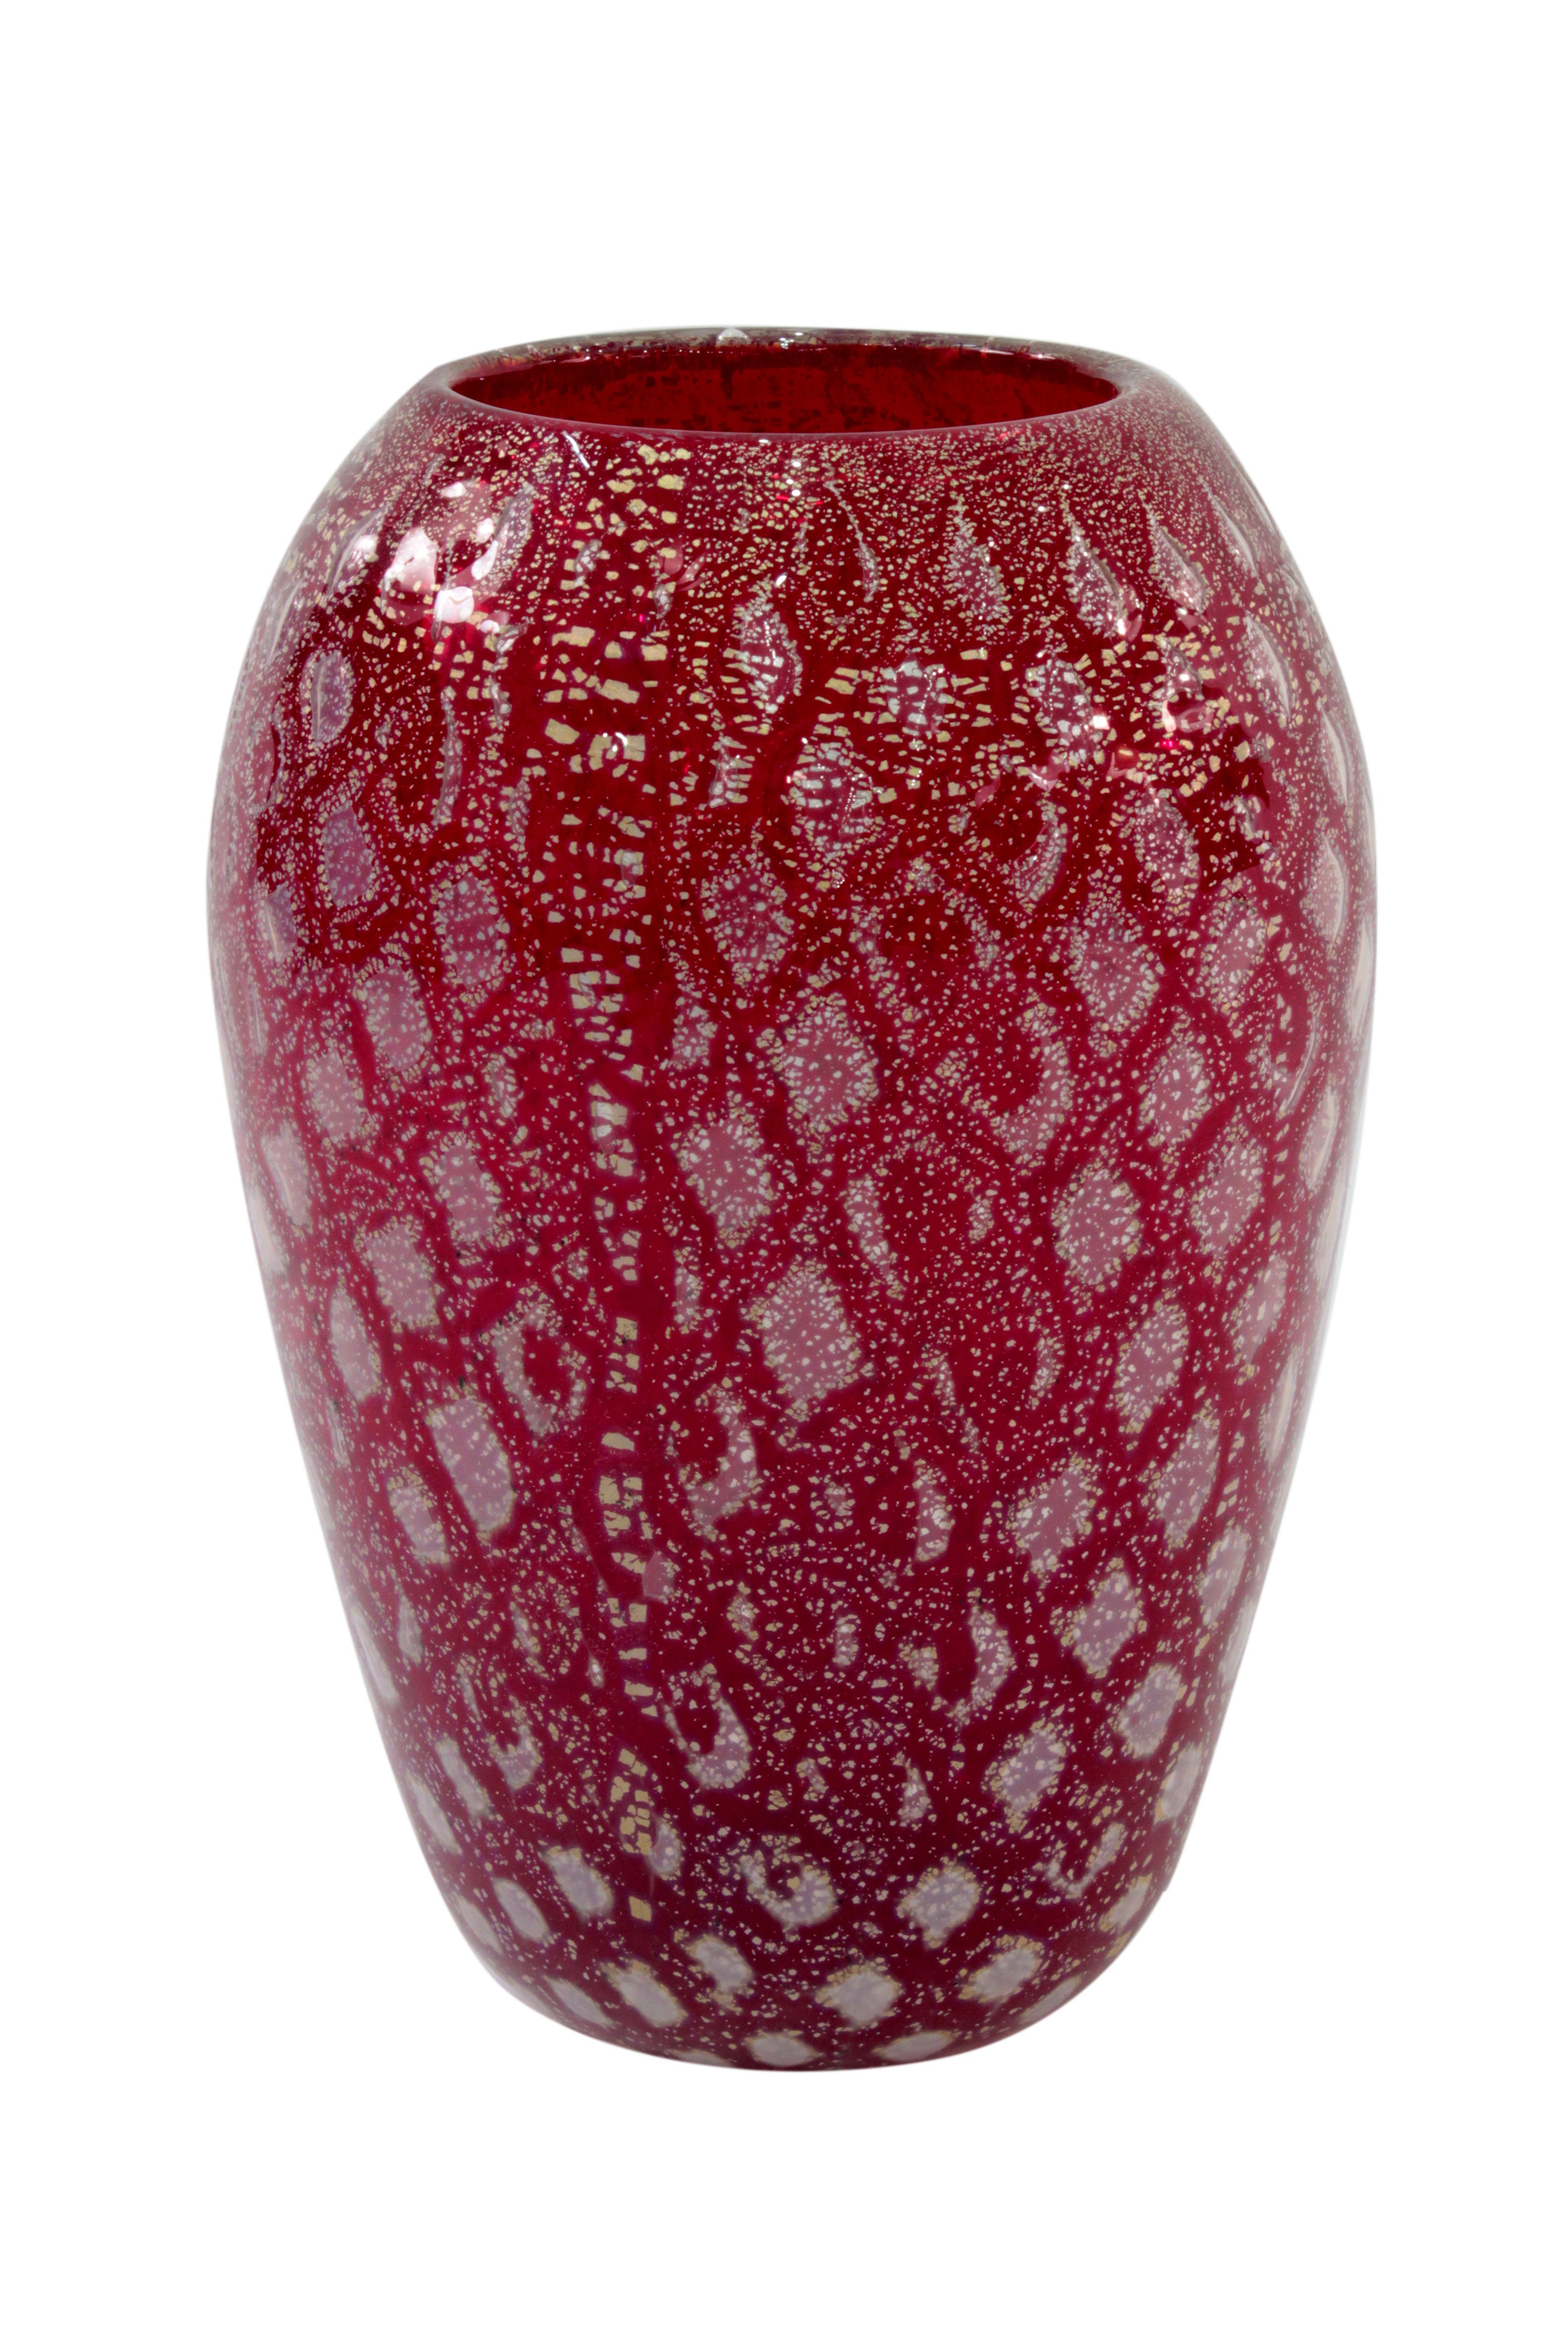 Handblown Red Glass Vase with Gold Foil by Giulio Radi